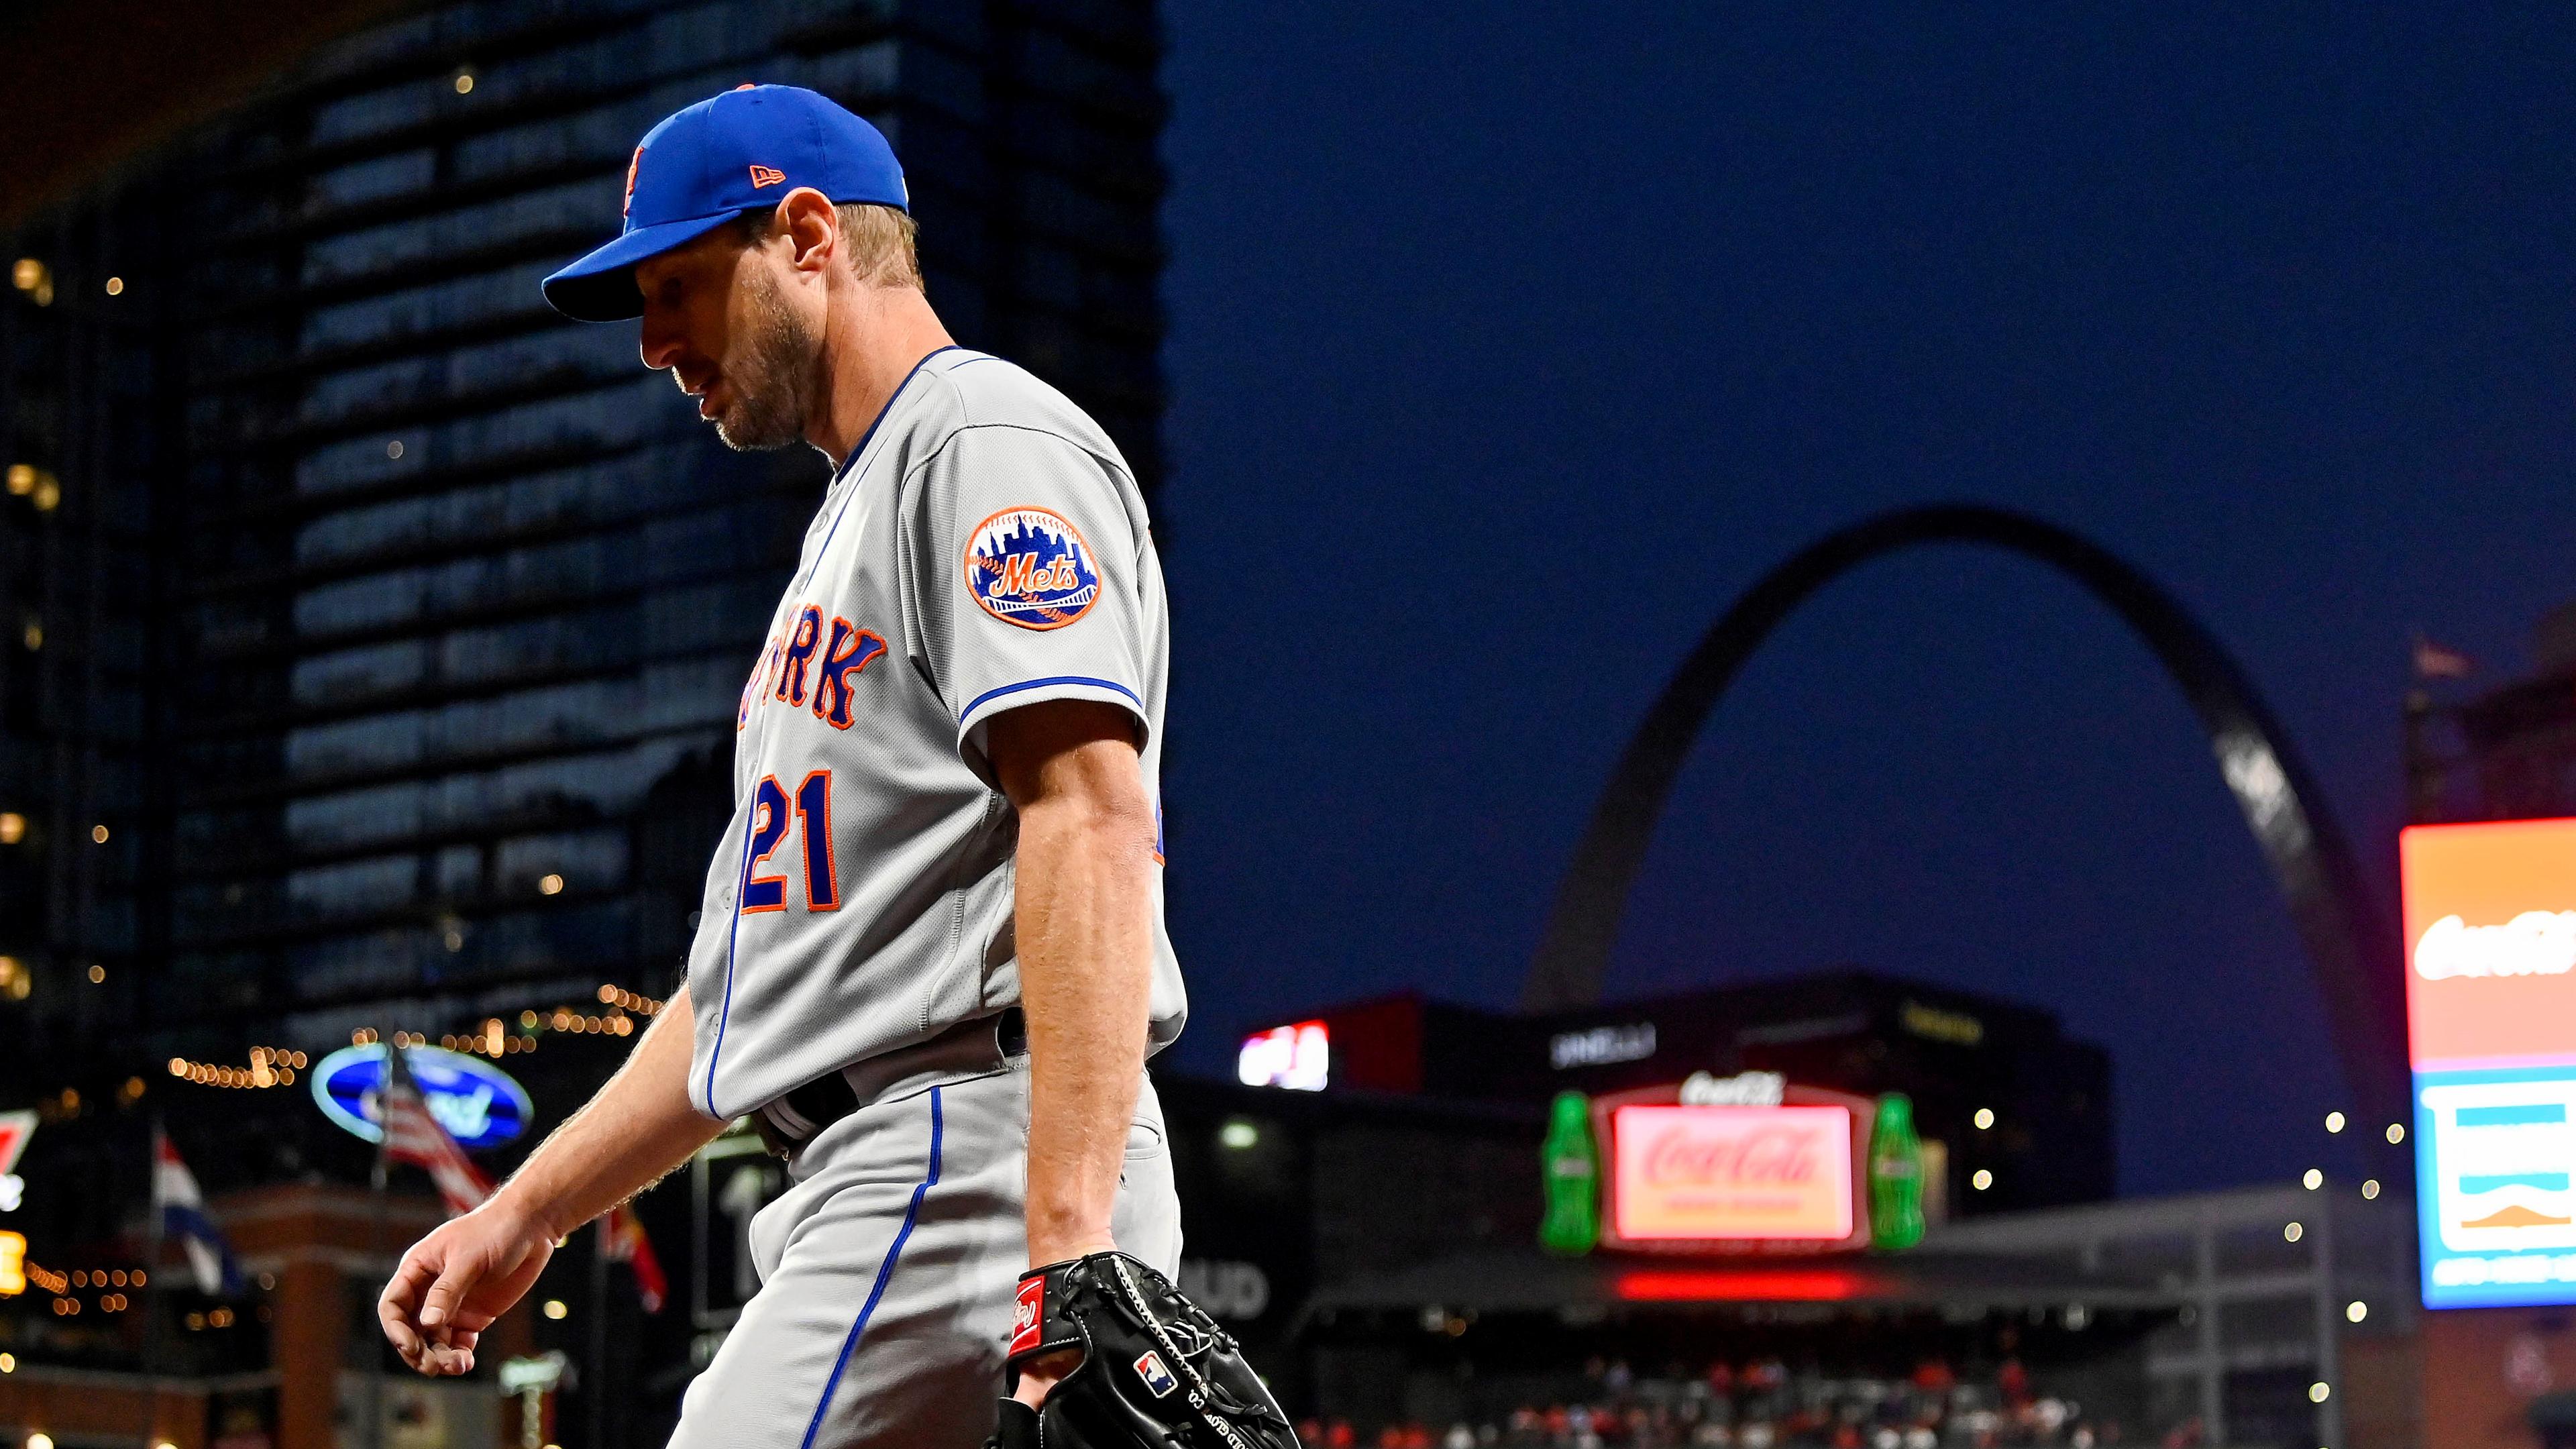 Apr 25, 2022; St. Louis, Missouri, USA; New York Mets starting pitcher Max Scherzer (21) walks off the field after the fifth inning against the St. Louis Cardinals at Busch Stadium. Mandatory Credit: Jeff Curry-USA TODAY Sports / Jeff Curry-USA TODAY Sports